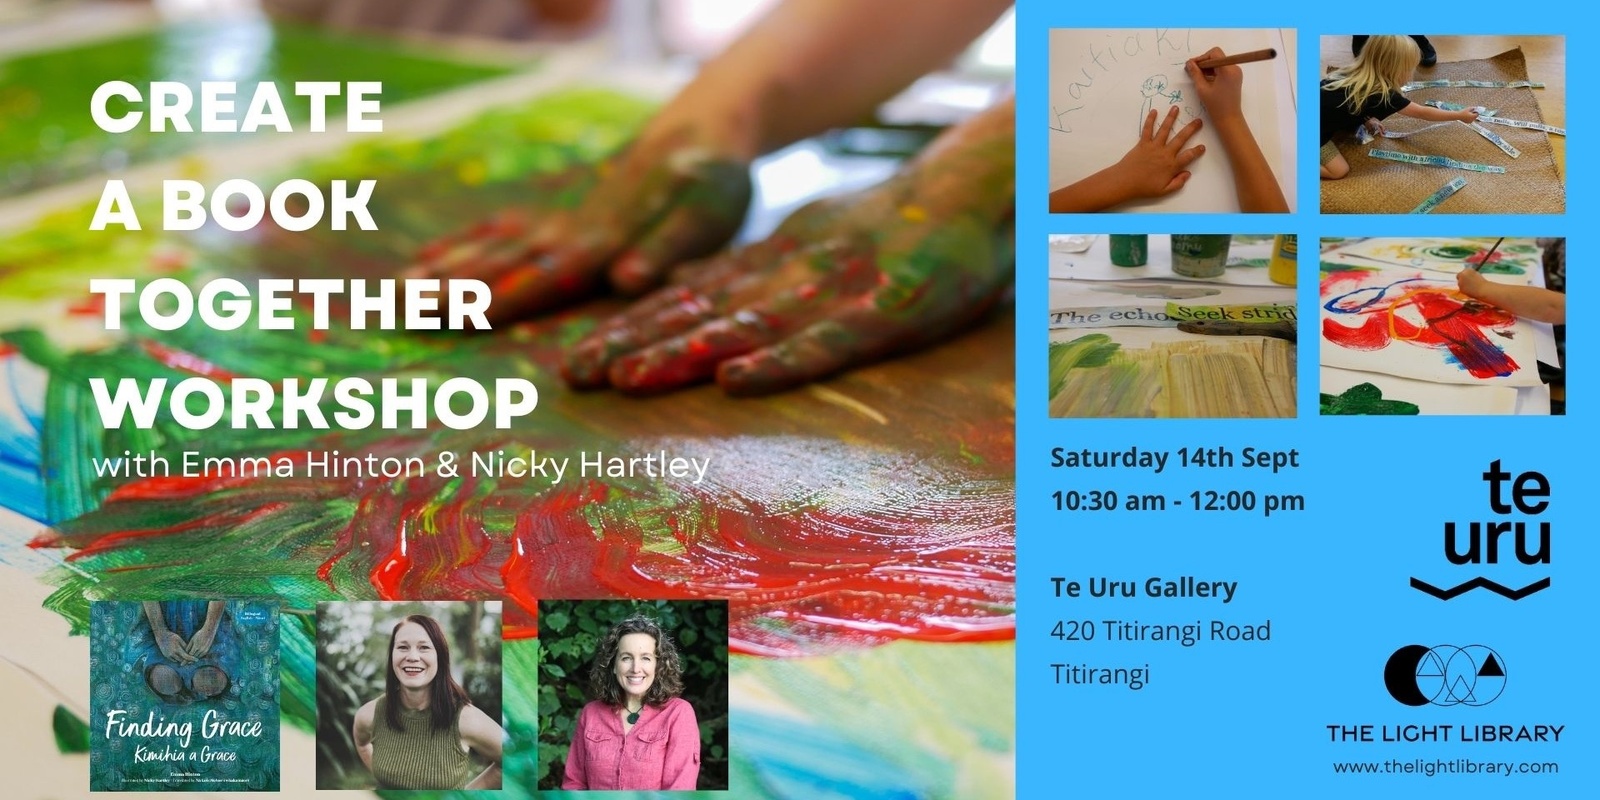 Banner image for Create a Book Together - 14th Sept at Te Uru Gallery